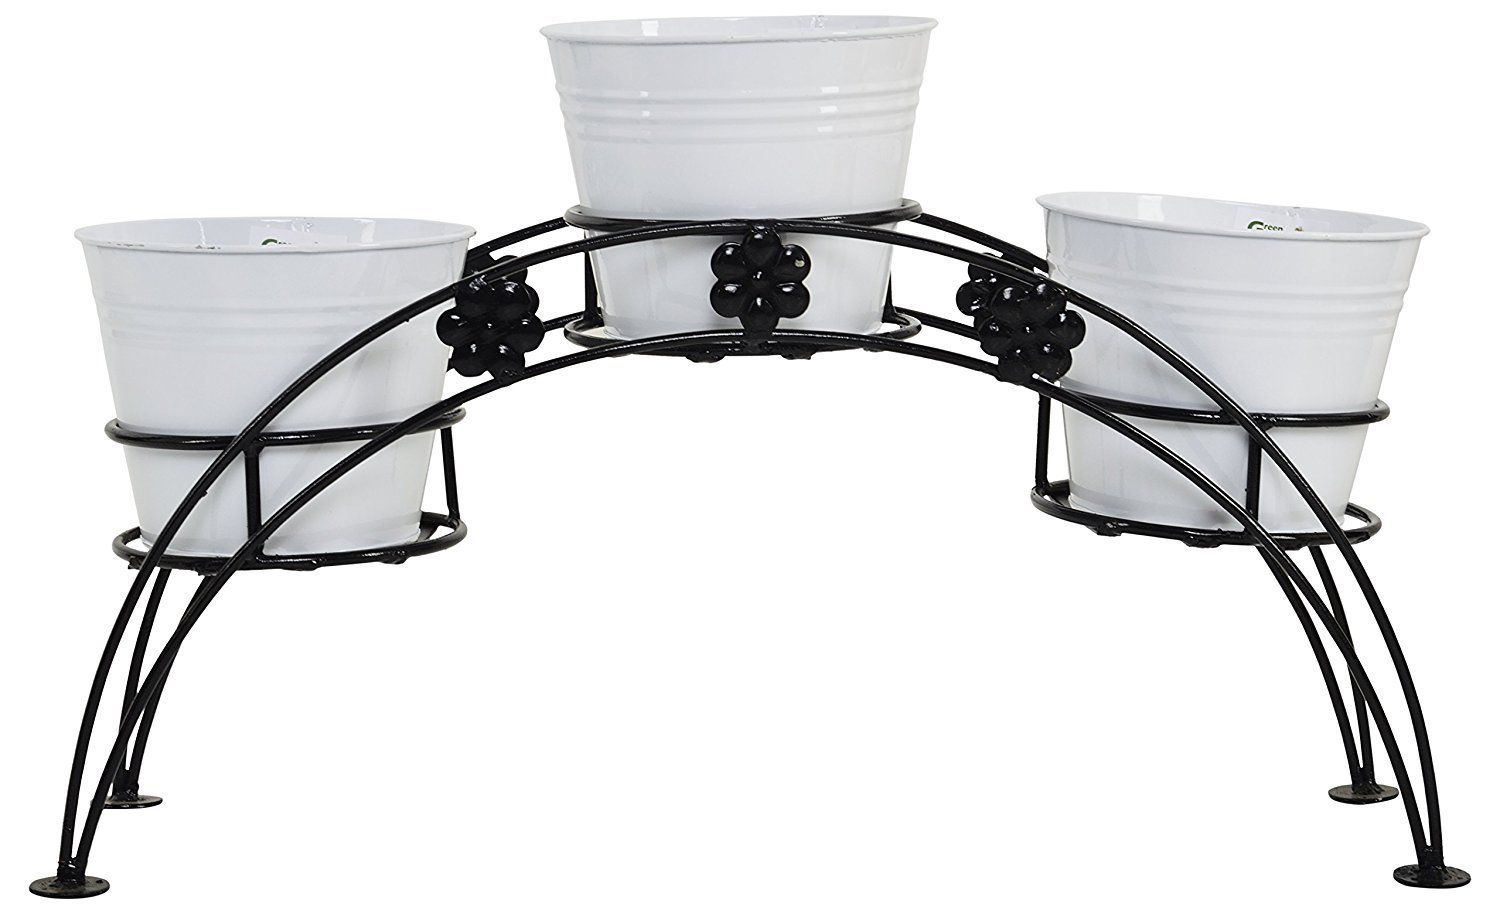 Iron 3 Tier Pot Stand With Metal Planter White